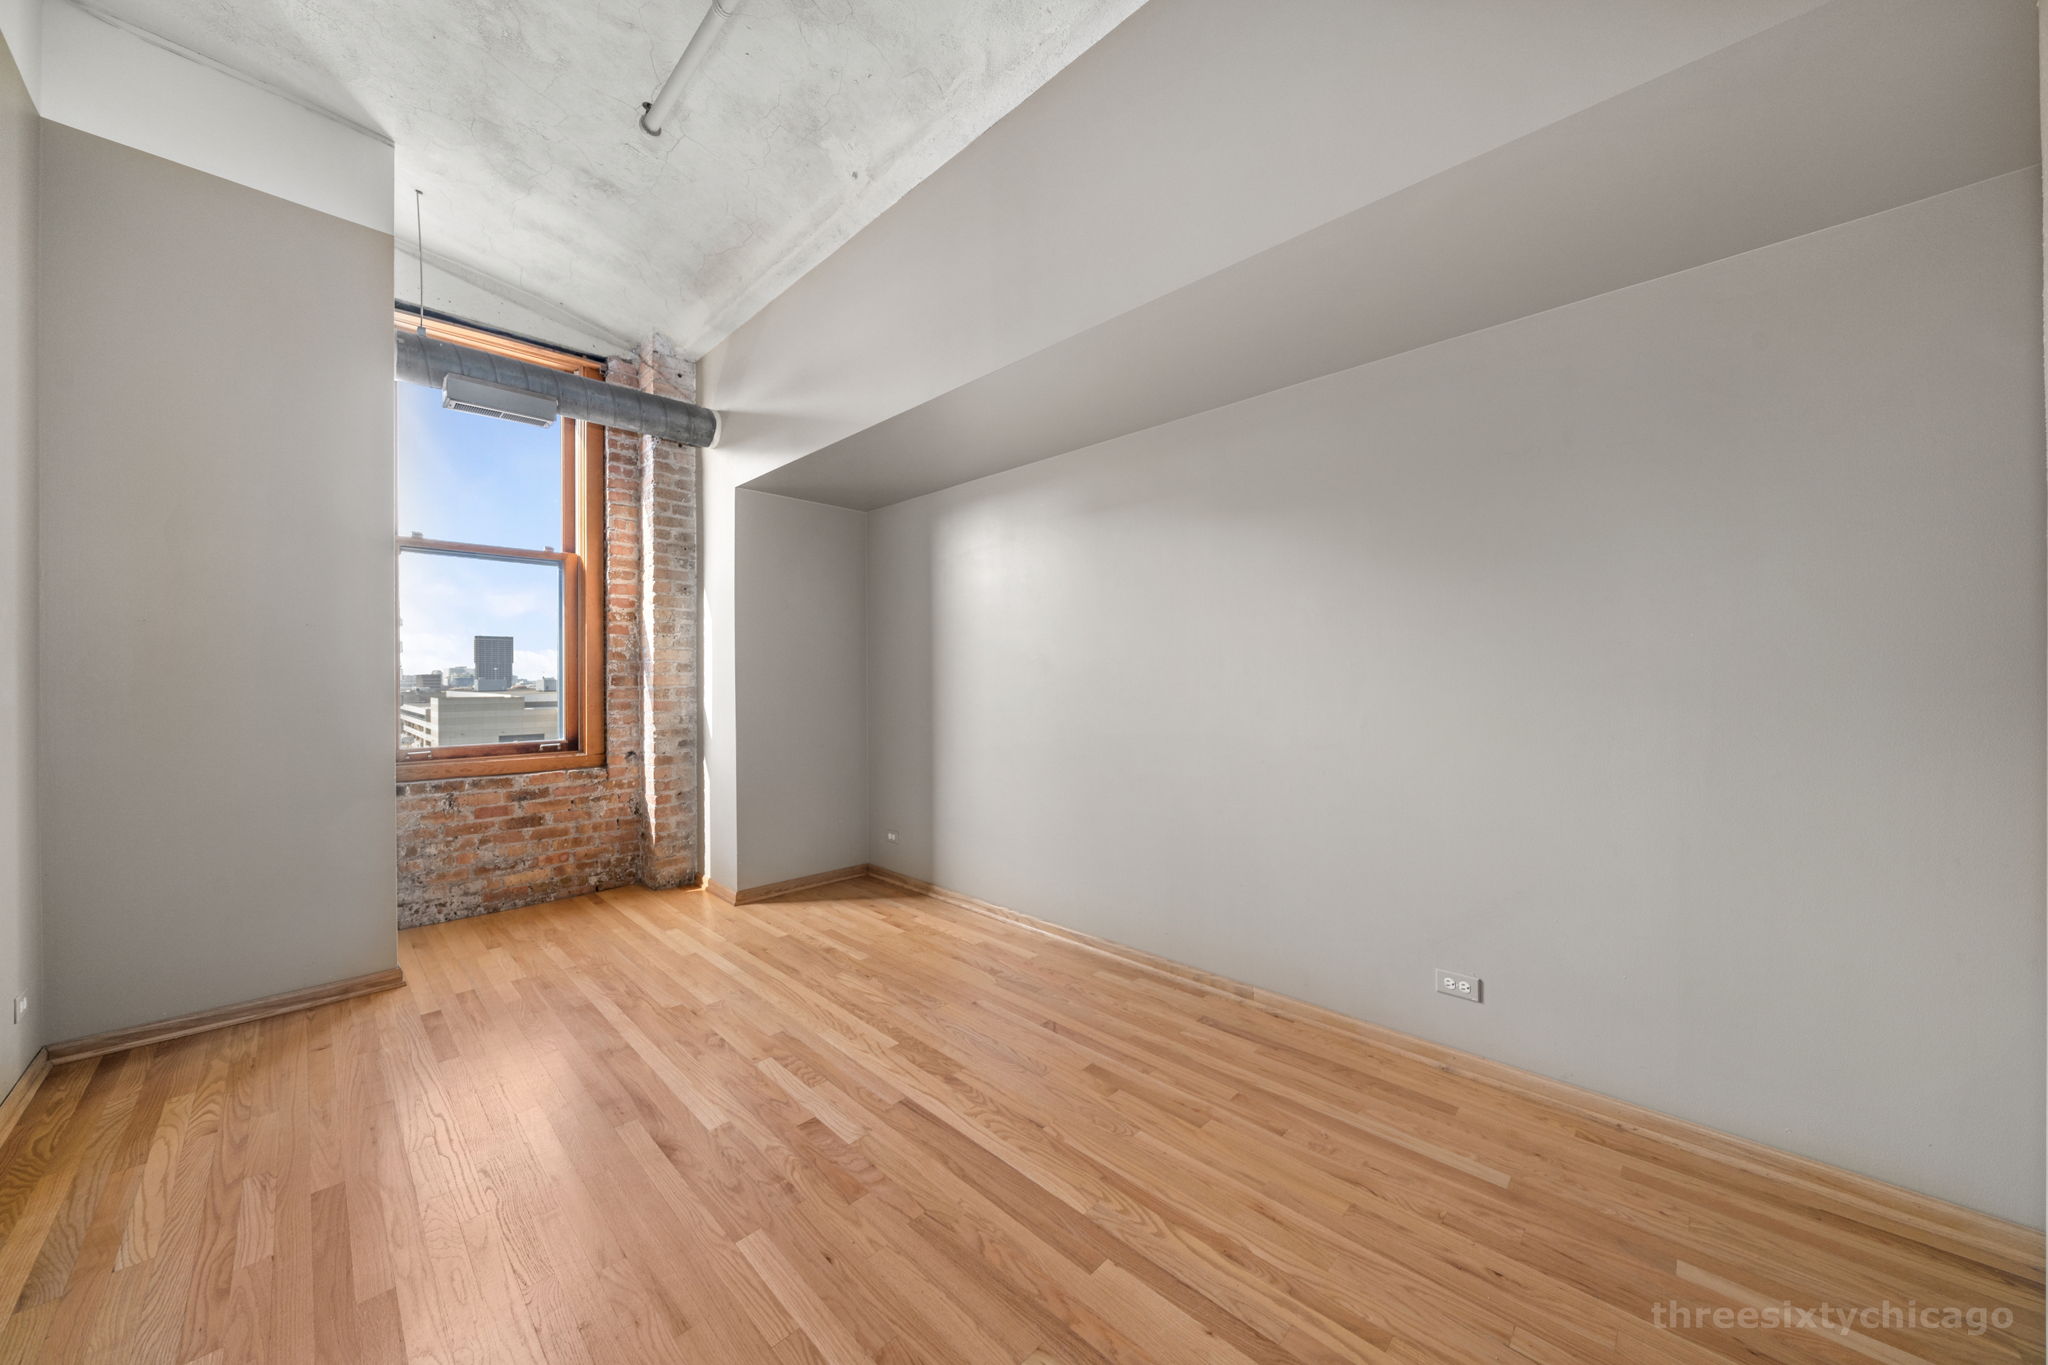  801 S Wells St 807, Chicago, IL 60607, US Photo 18